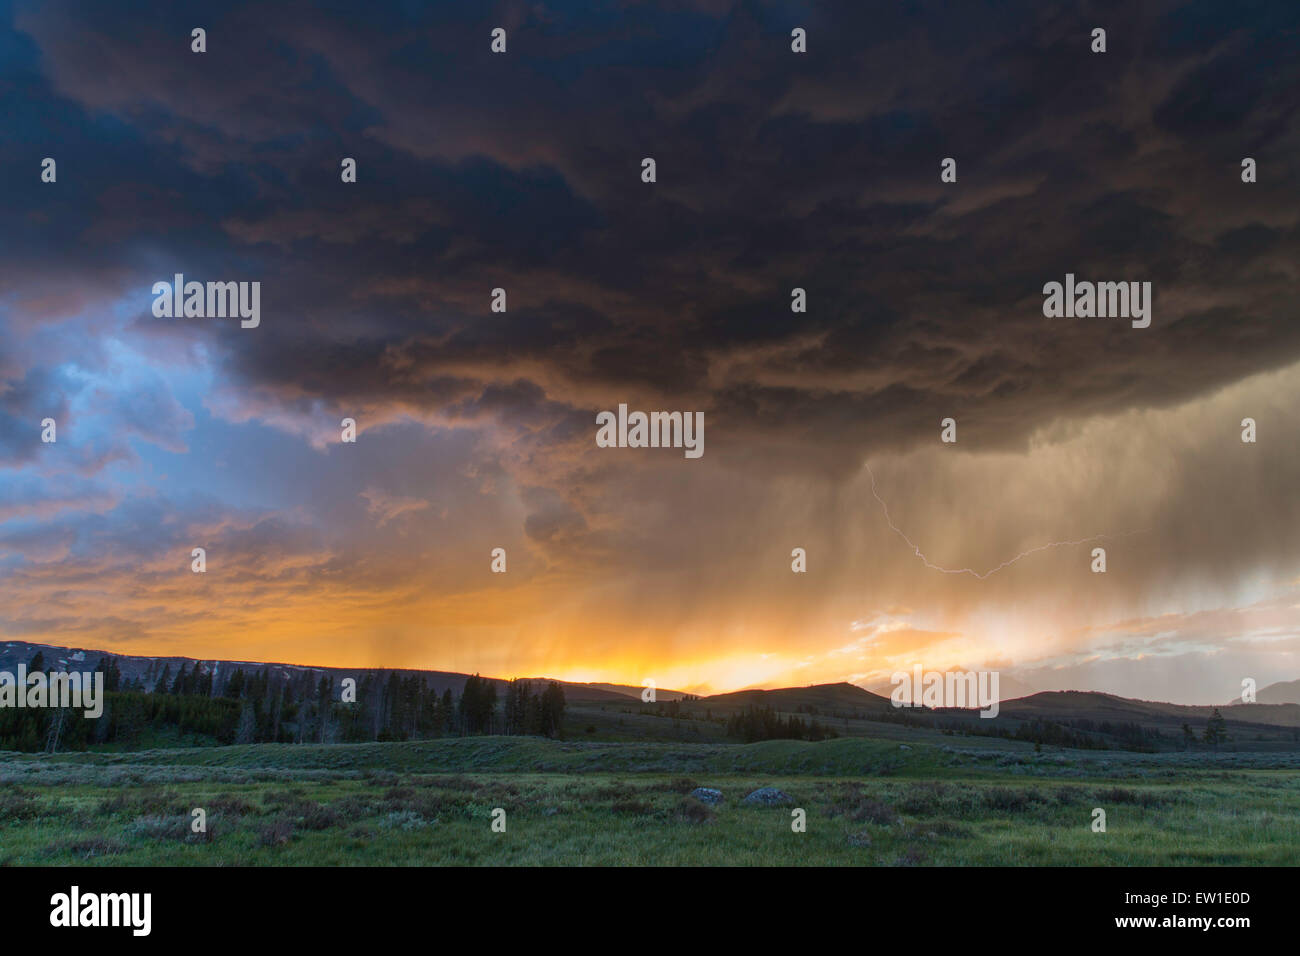 Thunderstorm at sunset on Swan Lake Flat in Yellowstone National Park June 12, 2015 in Yellowstone, Wyoming. Stock Photo